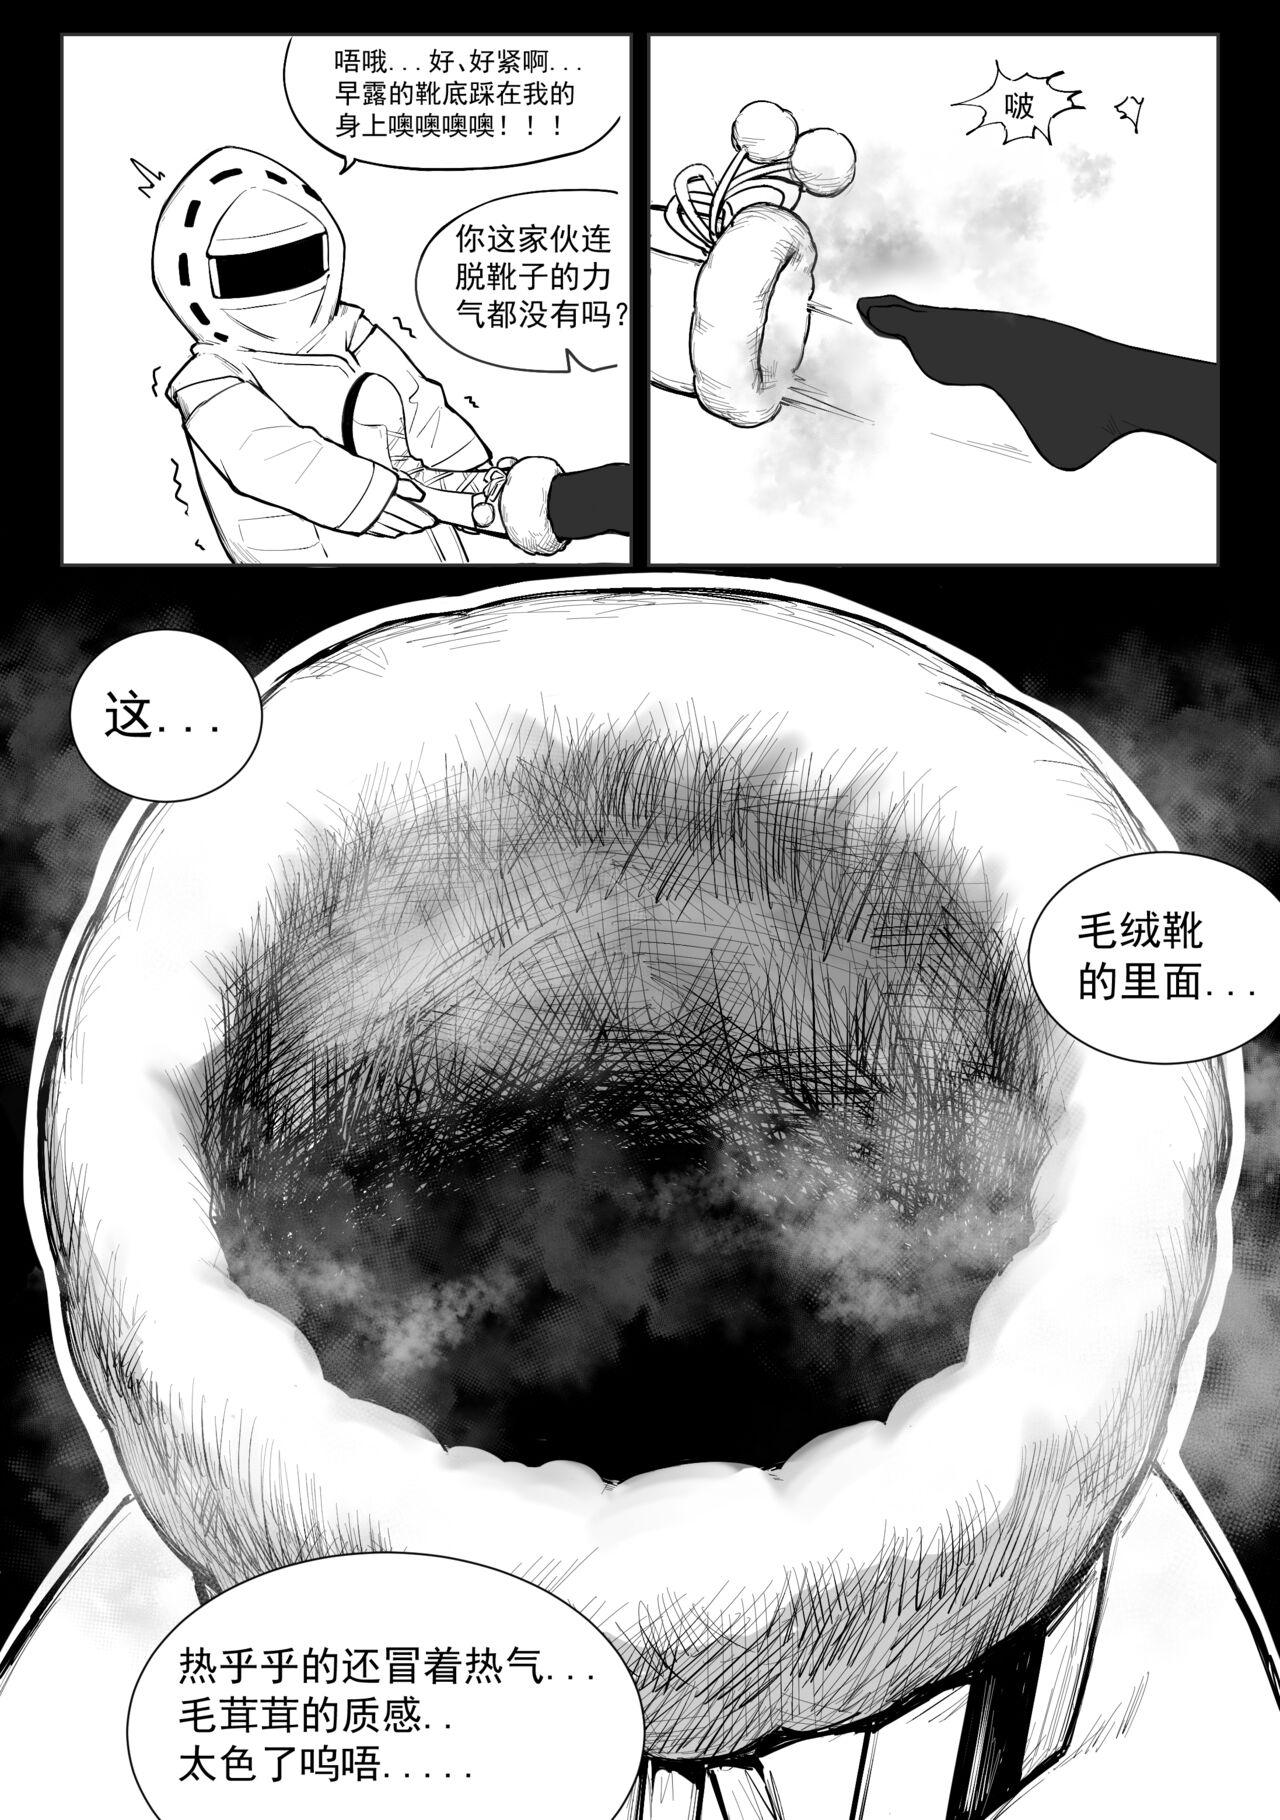 Bokep 澄澈之冰 早露 - Arknights Analfucking - Page 2